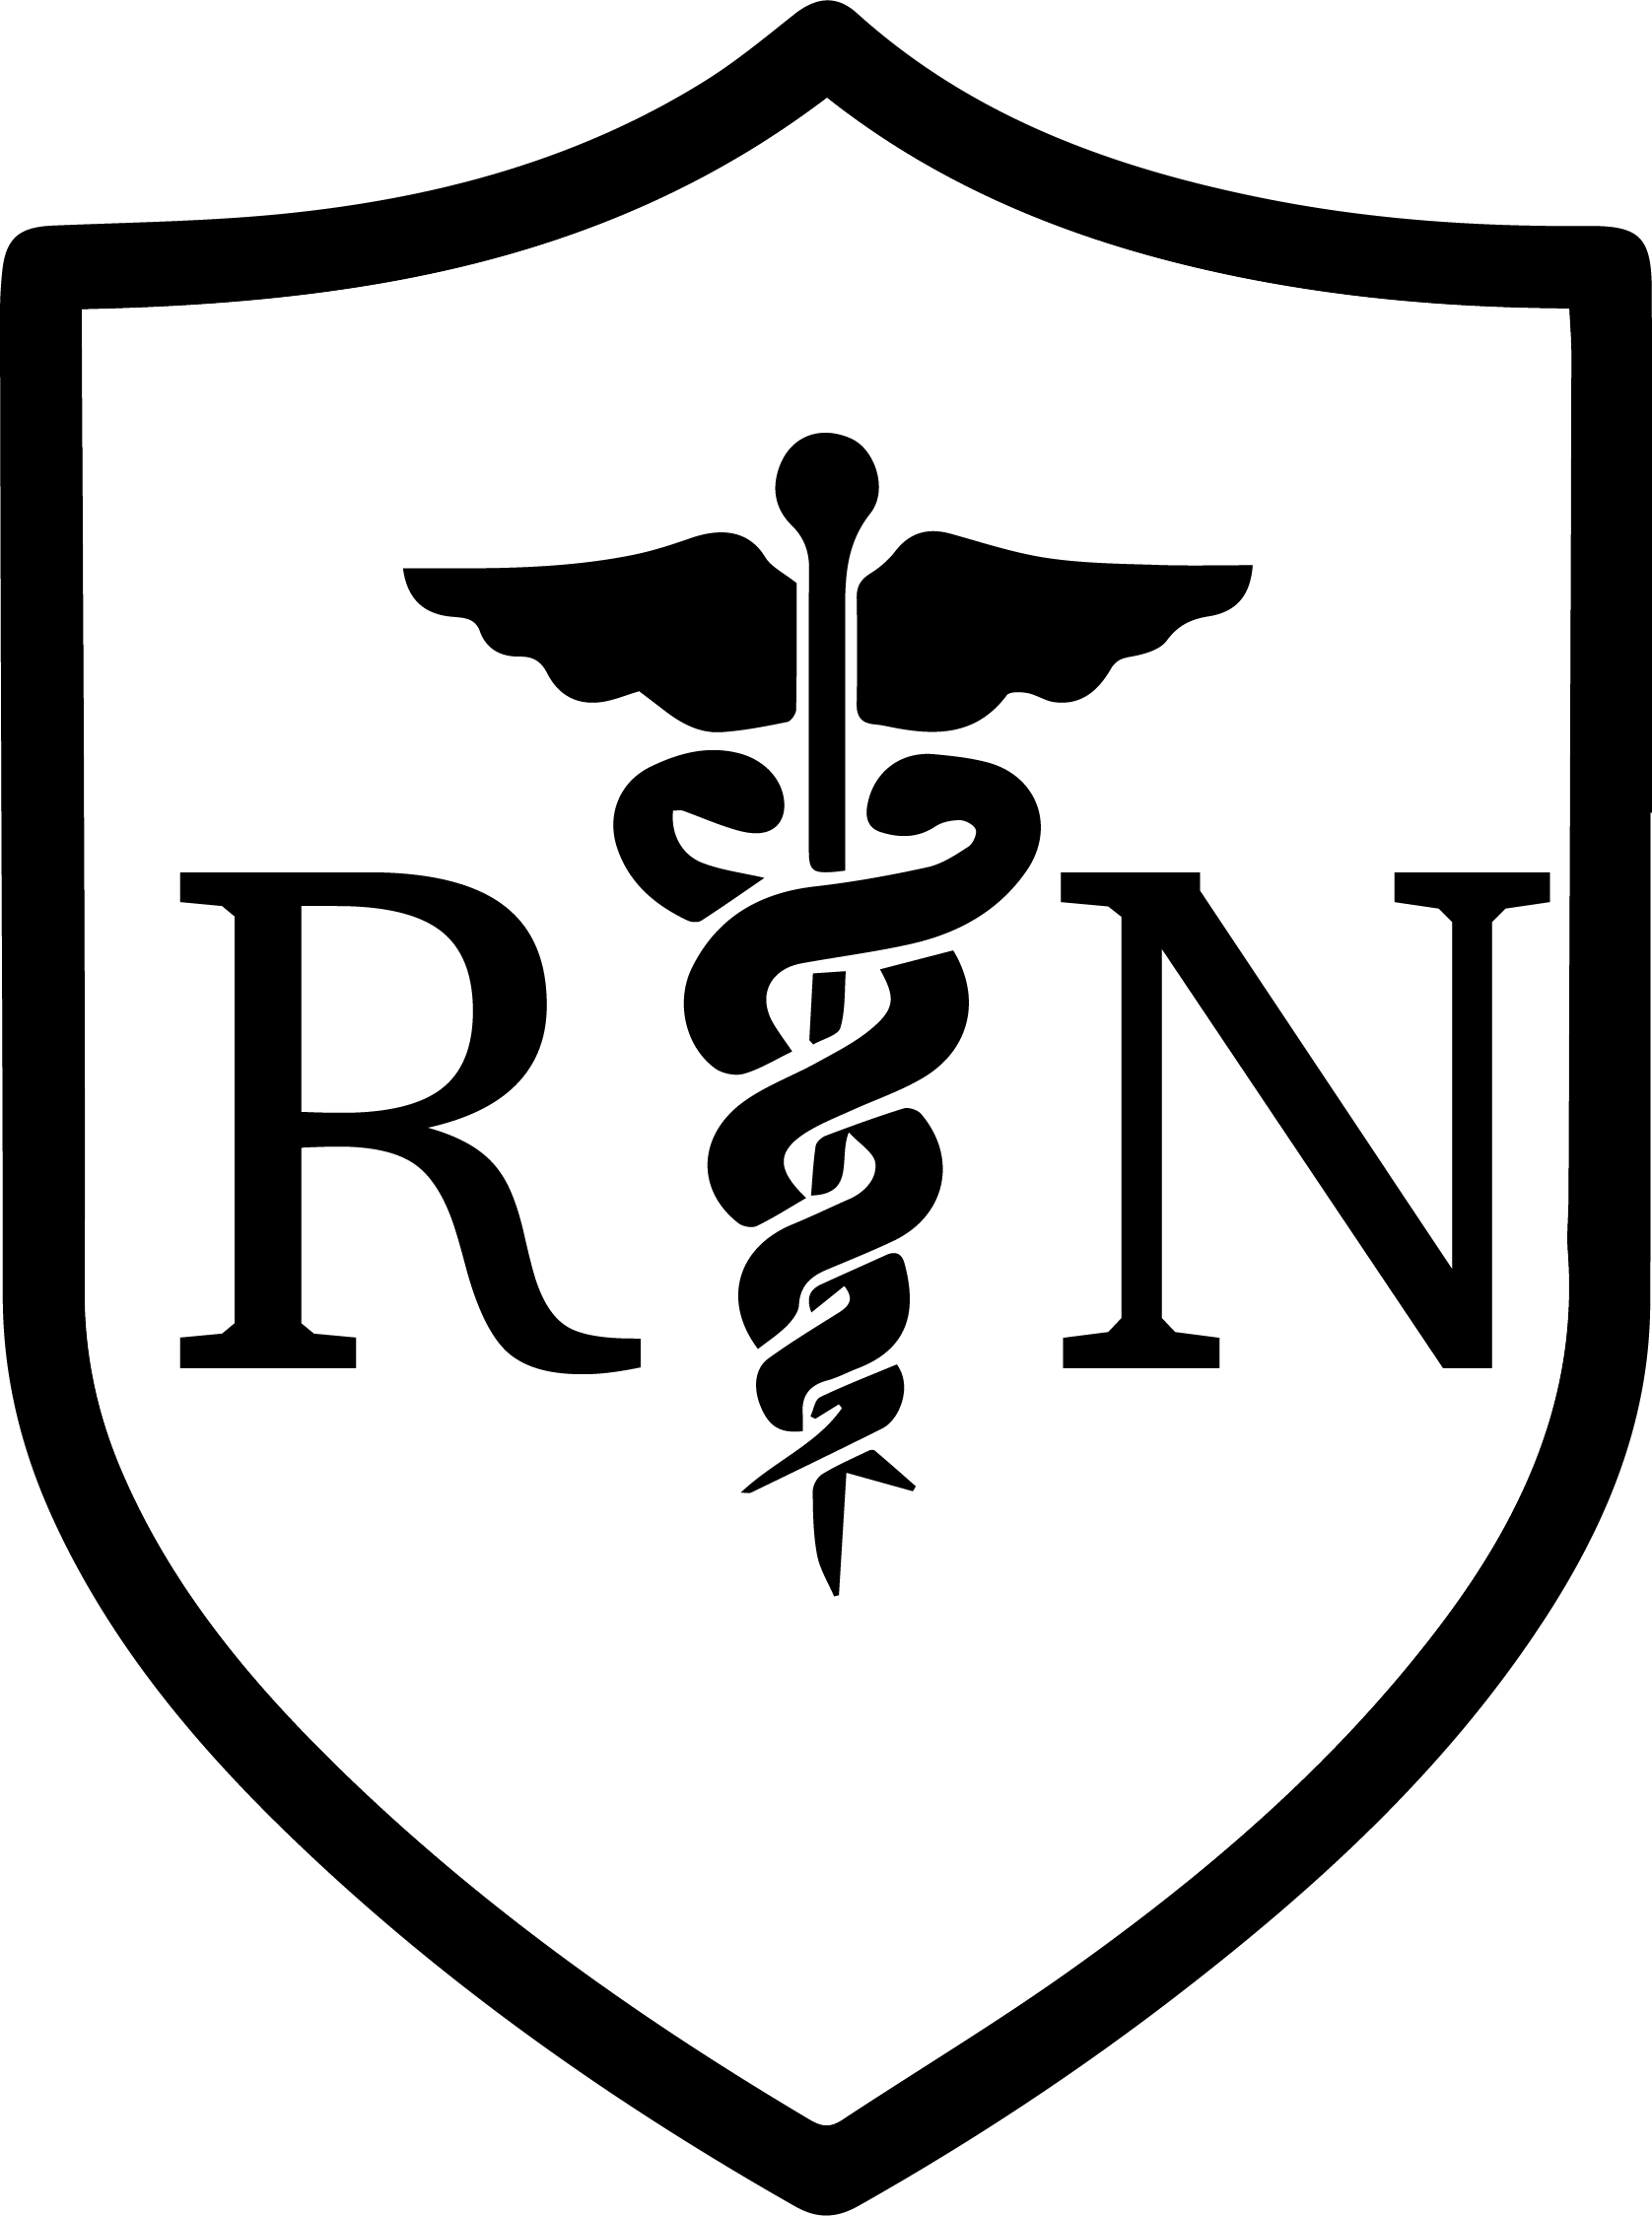 Image of a shield shaped icon with the caduceus symbol between letters R and N